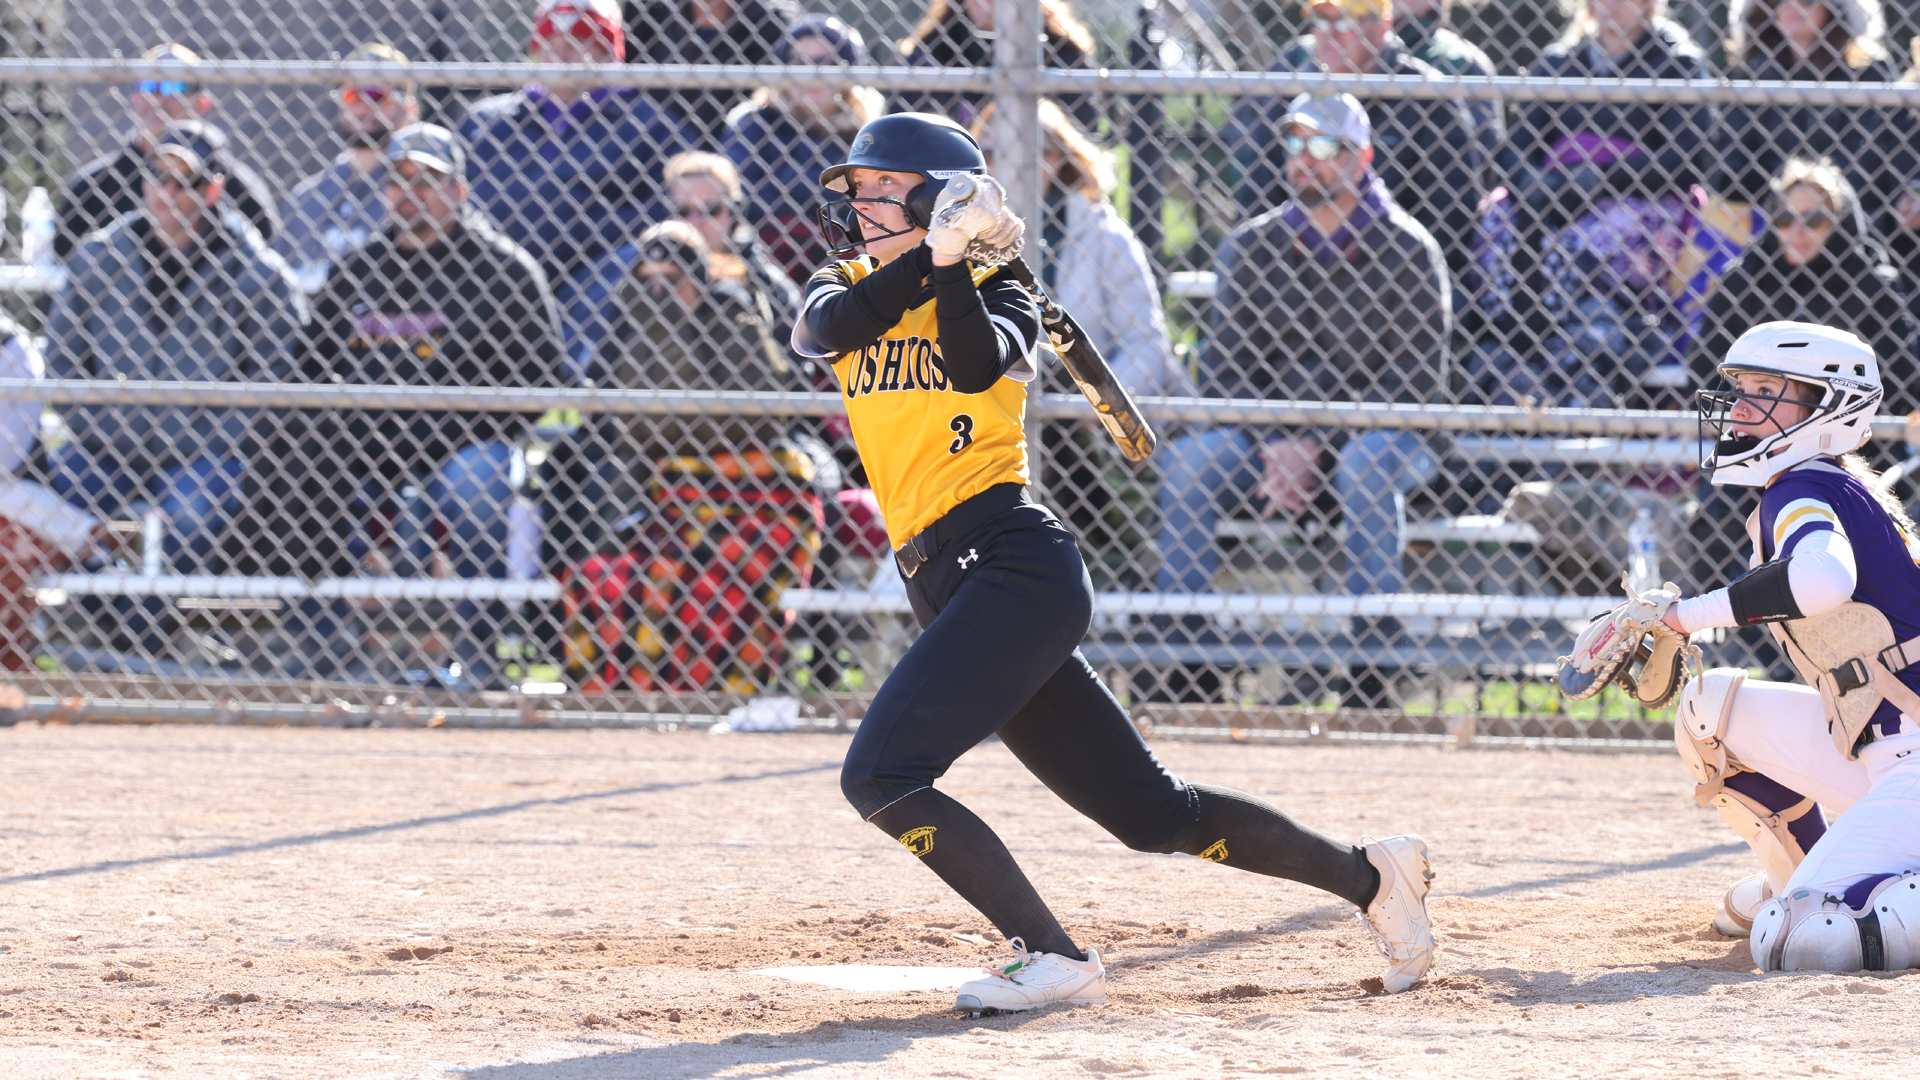 Haylie Wittman hit two RBIs in the Titans' 3-2 game two win over UW-Stevens Point on Wedneseday. Photo Credit: Steve Frommell, UW-Oshkosh Sports Information